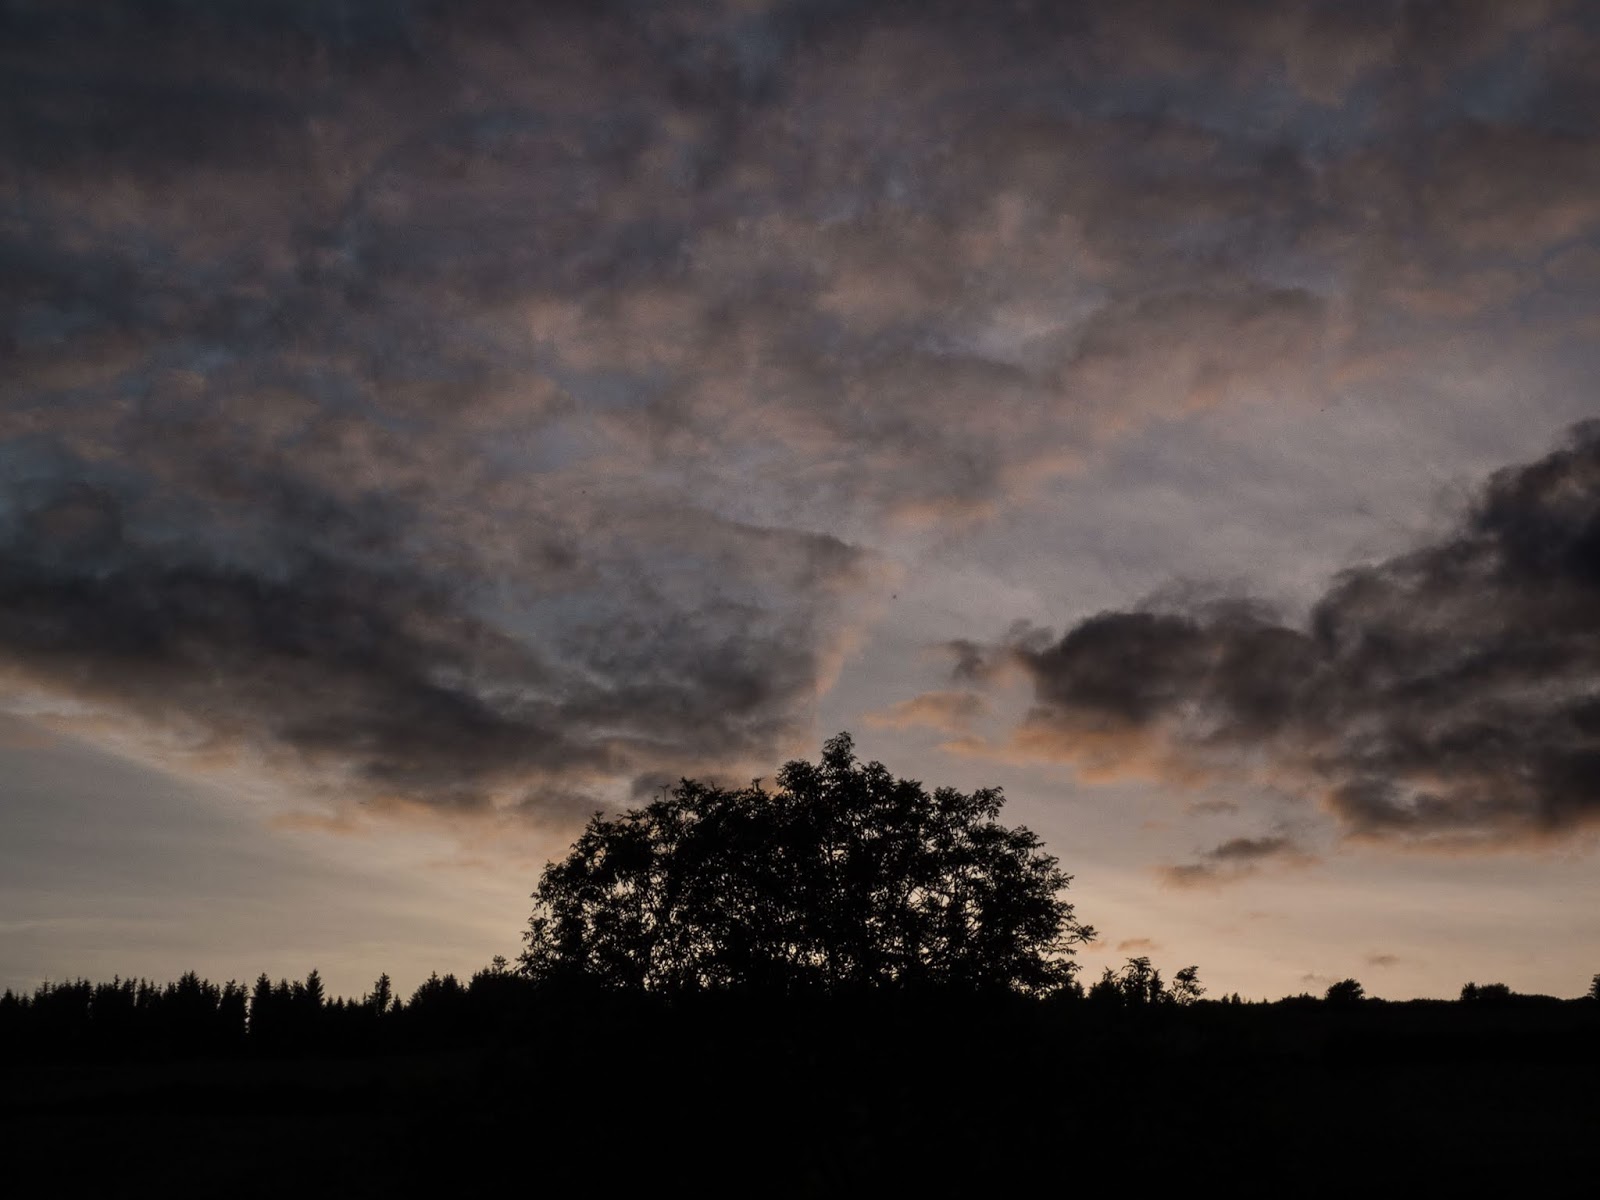 A grey sunset over a single tree canopy with a conifer forest in the distance.